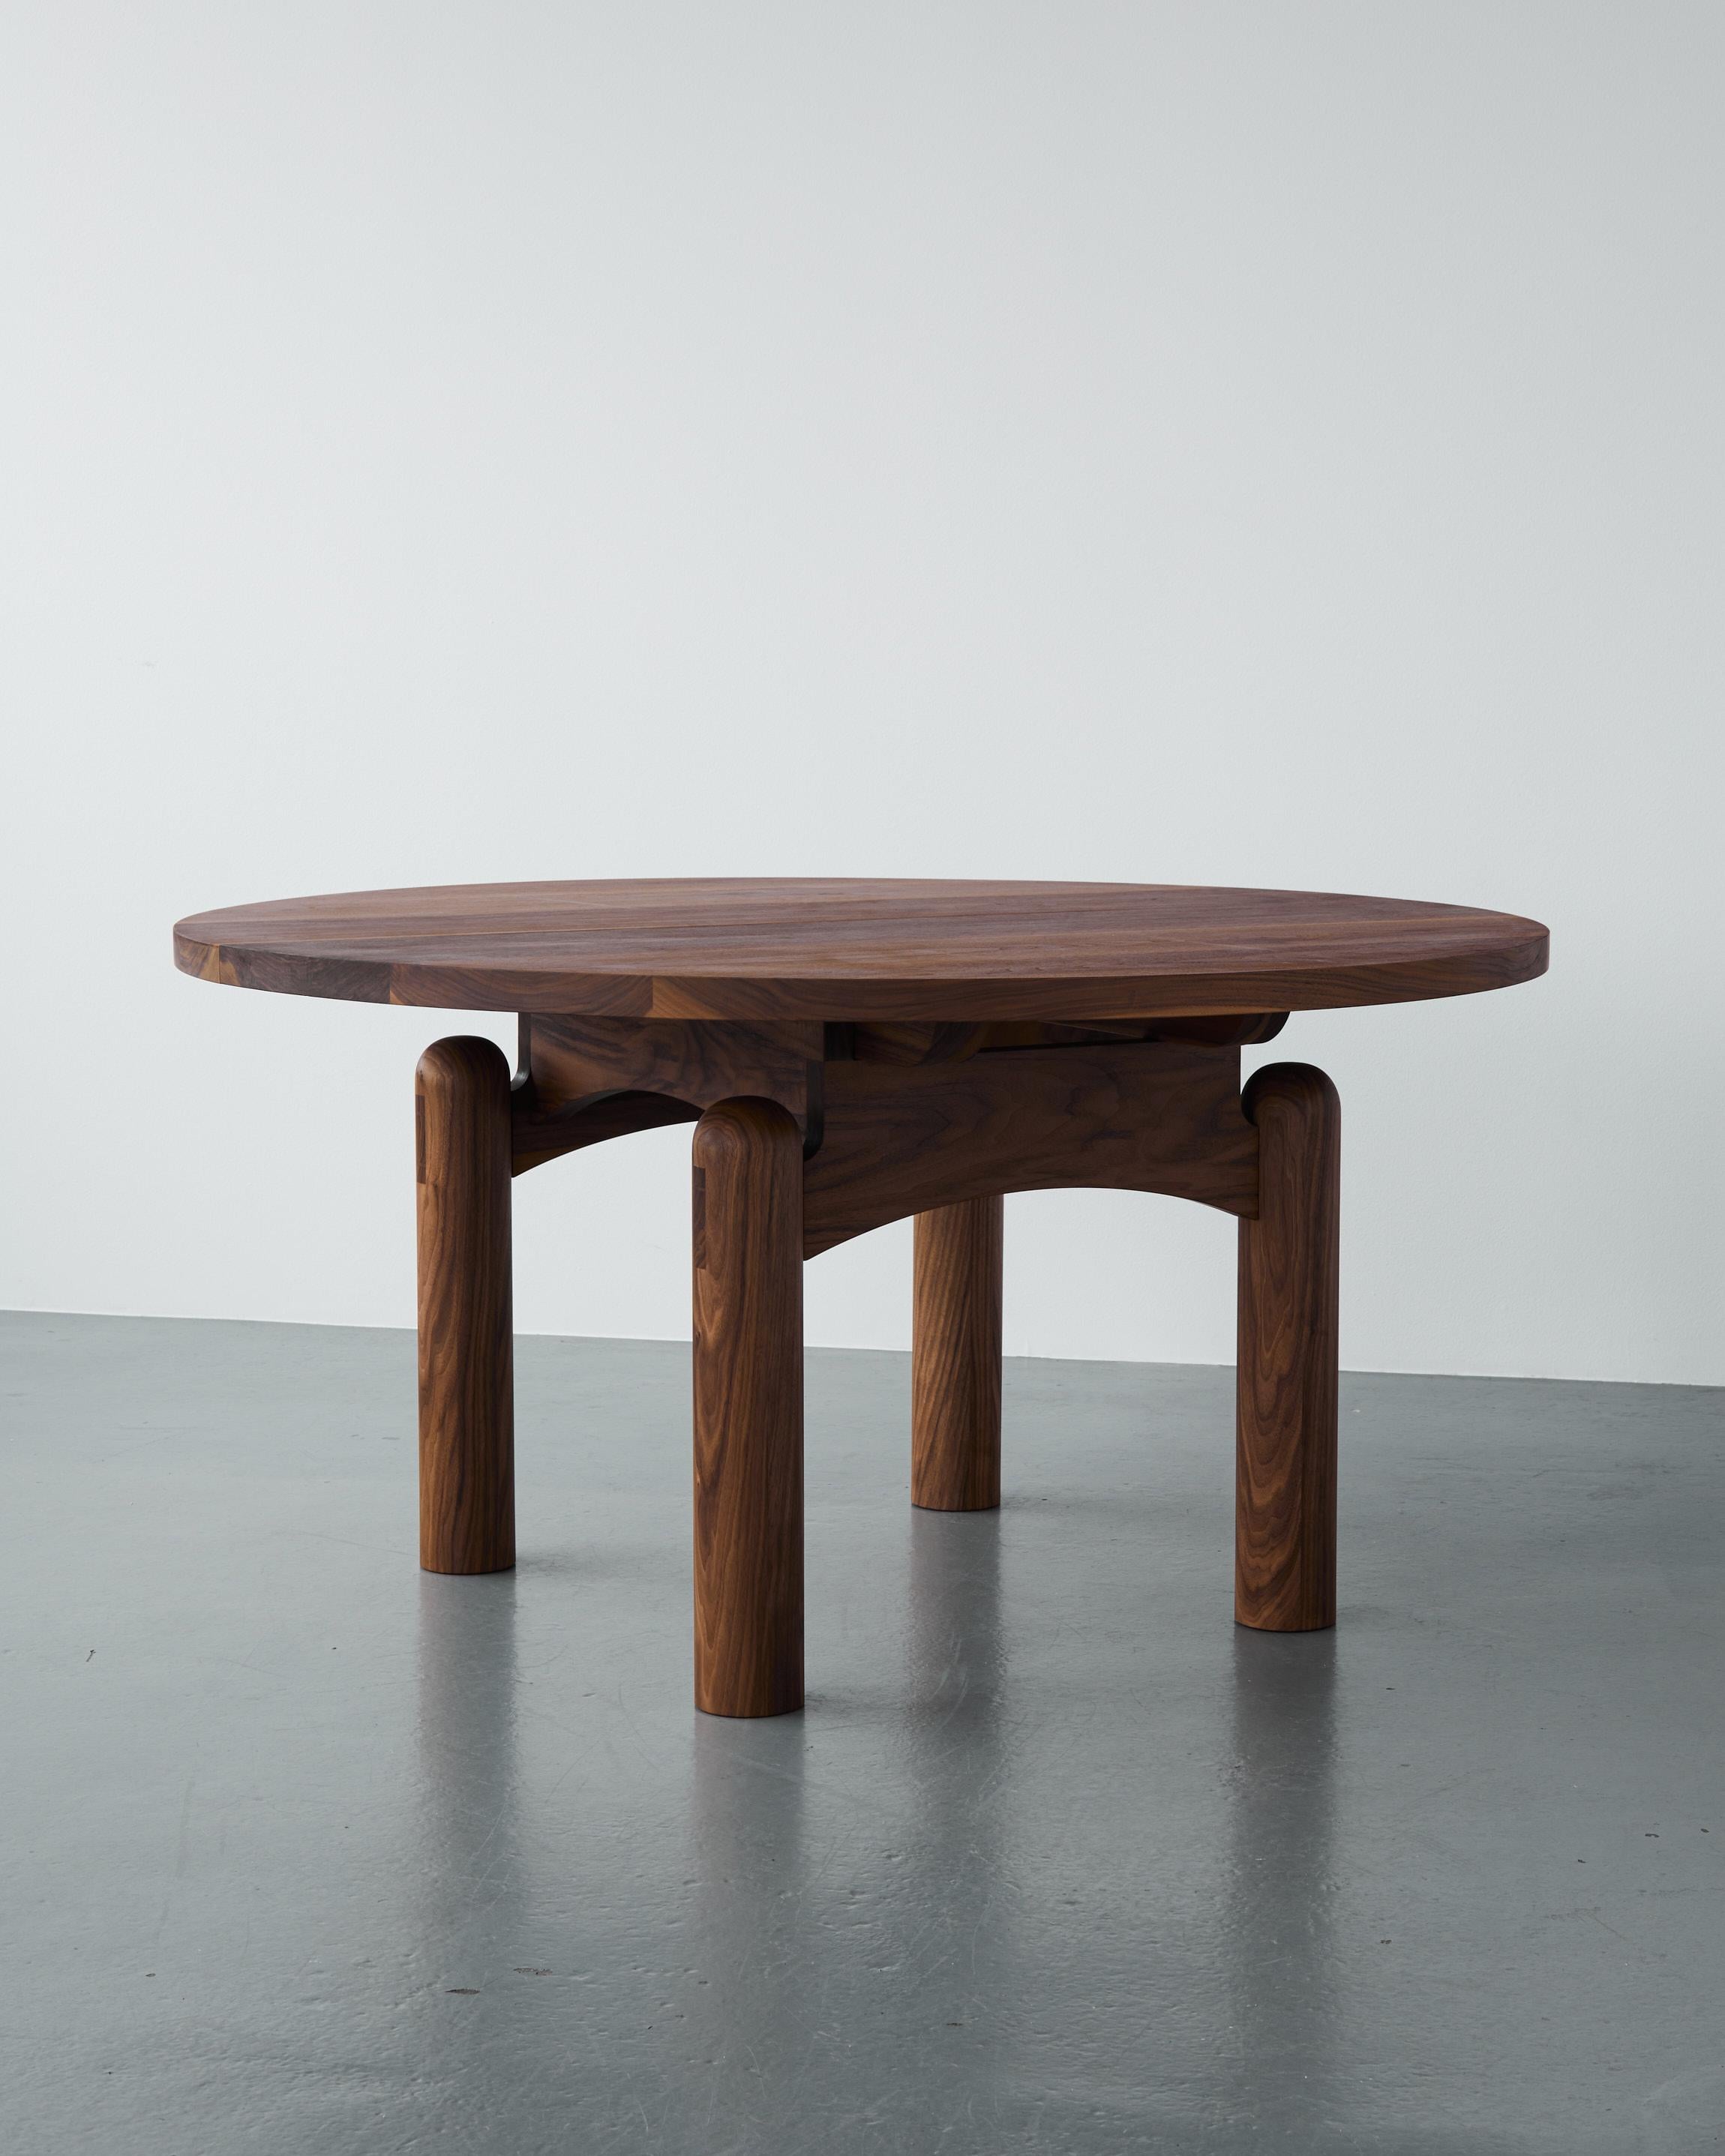 Modern Handmade Nora Dining Table, Extendable Ø150cm  - Walnut - by BACD studio For Sale